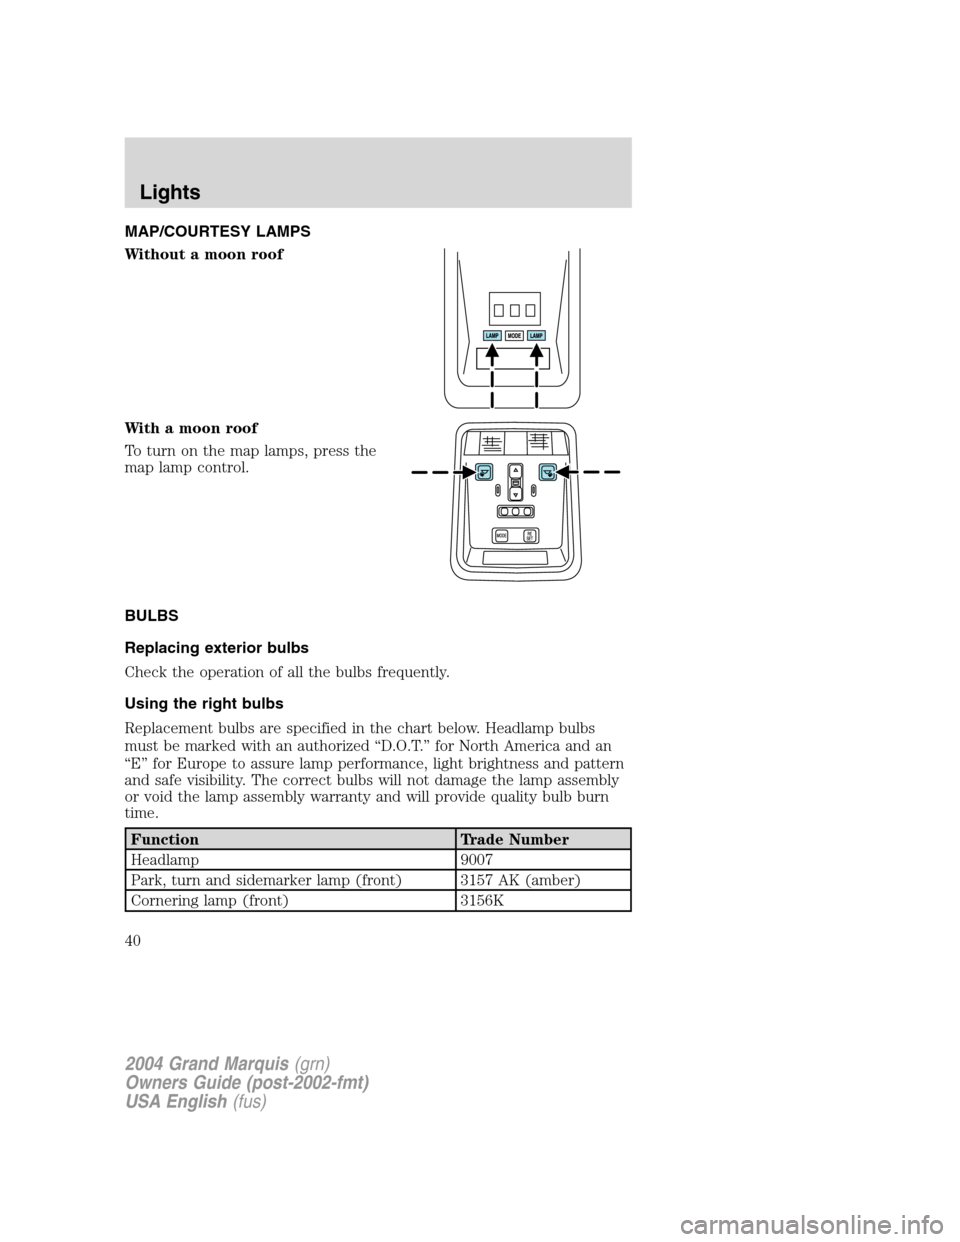 Mercury Grand Marquis 2004  Owners Manuals MAP/COURTESY LAMPS
Without a moon roof
With a moon roof
To turn on the map lamps, press the
map lamp control.
BULBS
Replacing exterior bulbs
Check the operation of all the bulbs frequently.
Using the 